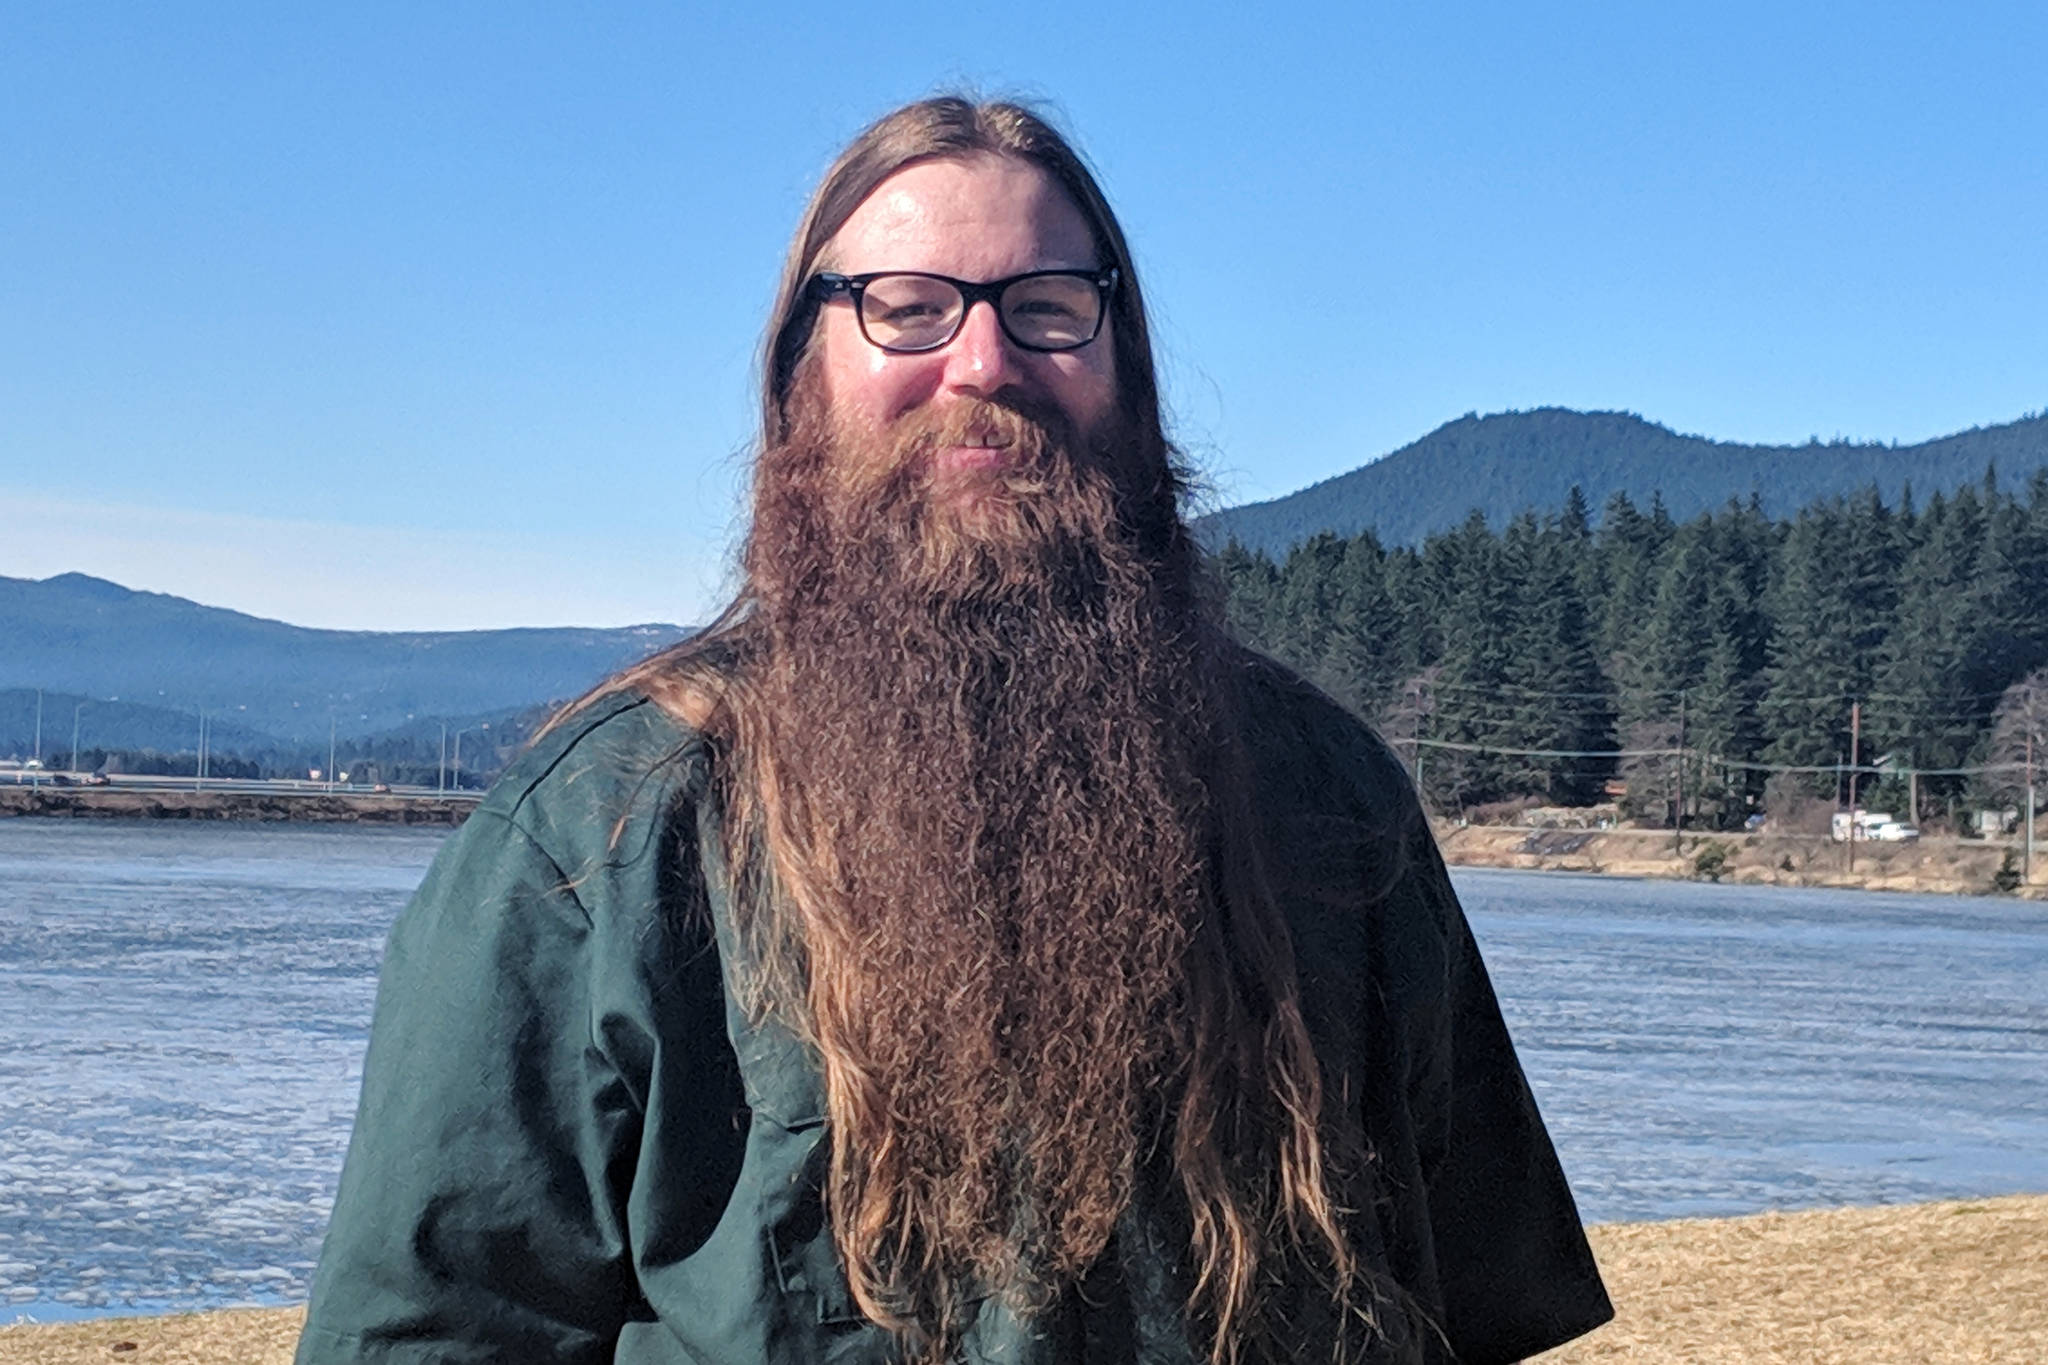 Matt Walker said he started growing his beard about 17 years ago when his then-girlfriend and now-wife said it looked like he could grow a beard. He’s now spearheading the creation of Juneau Beard Club. (Ben Hohenstatt | Capital City Weekly)